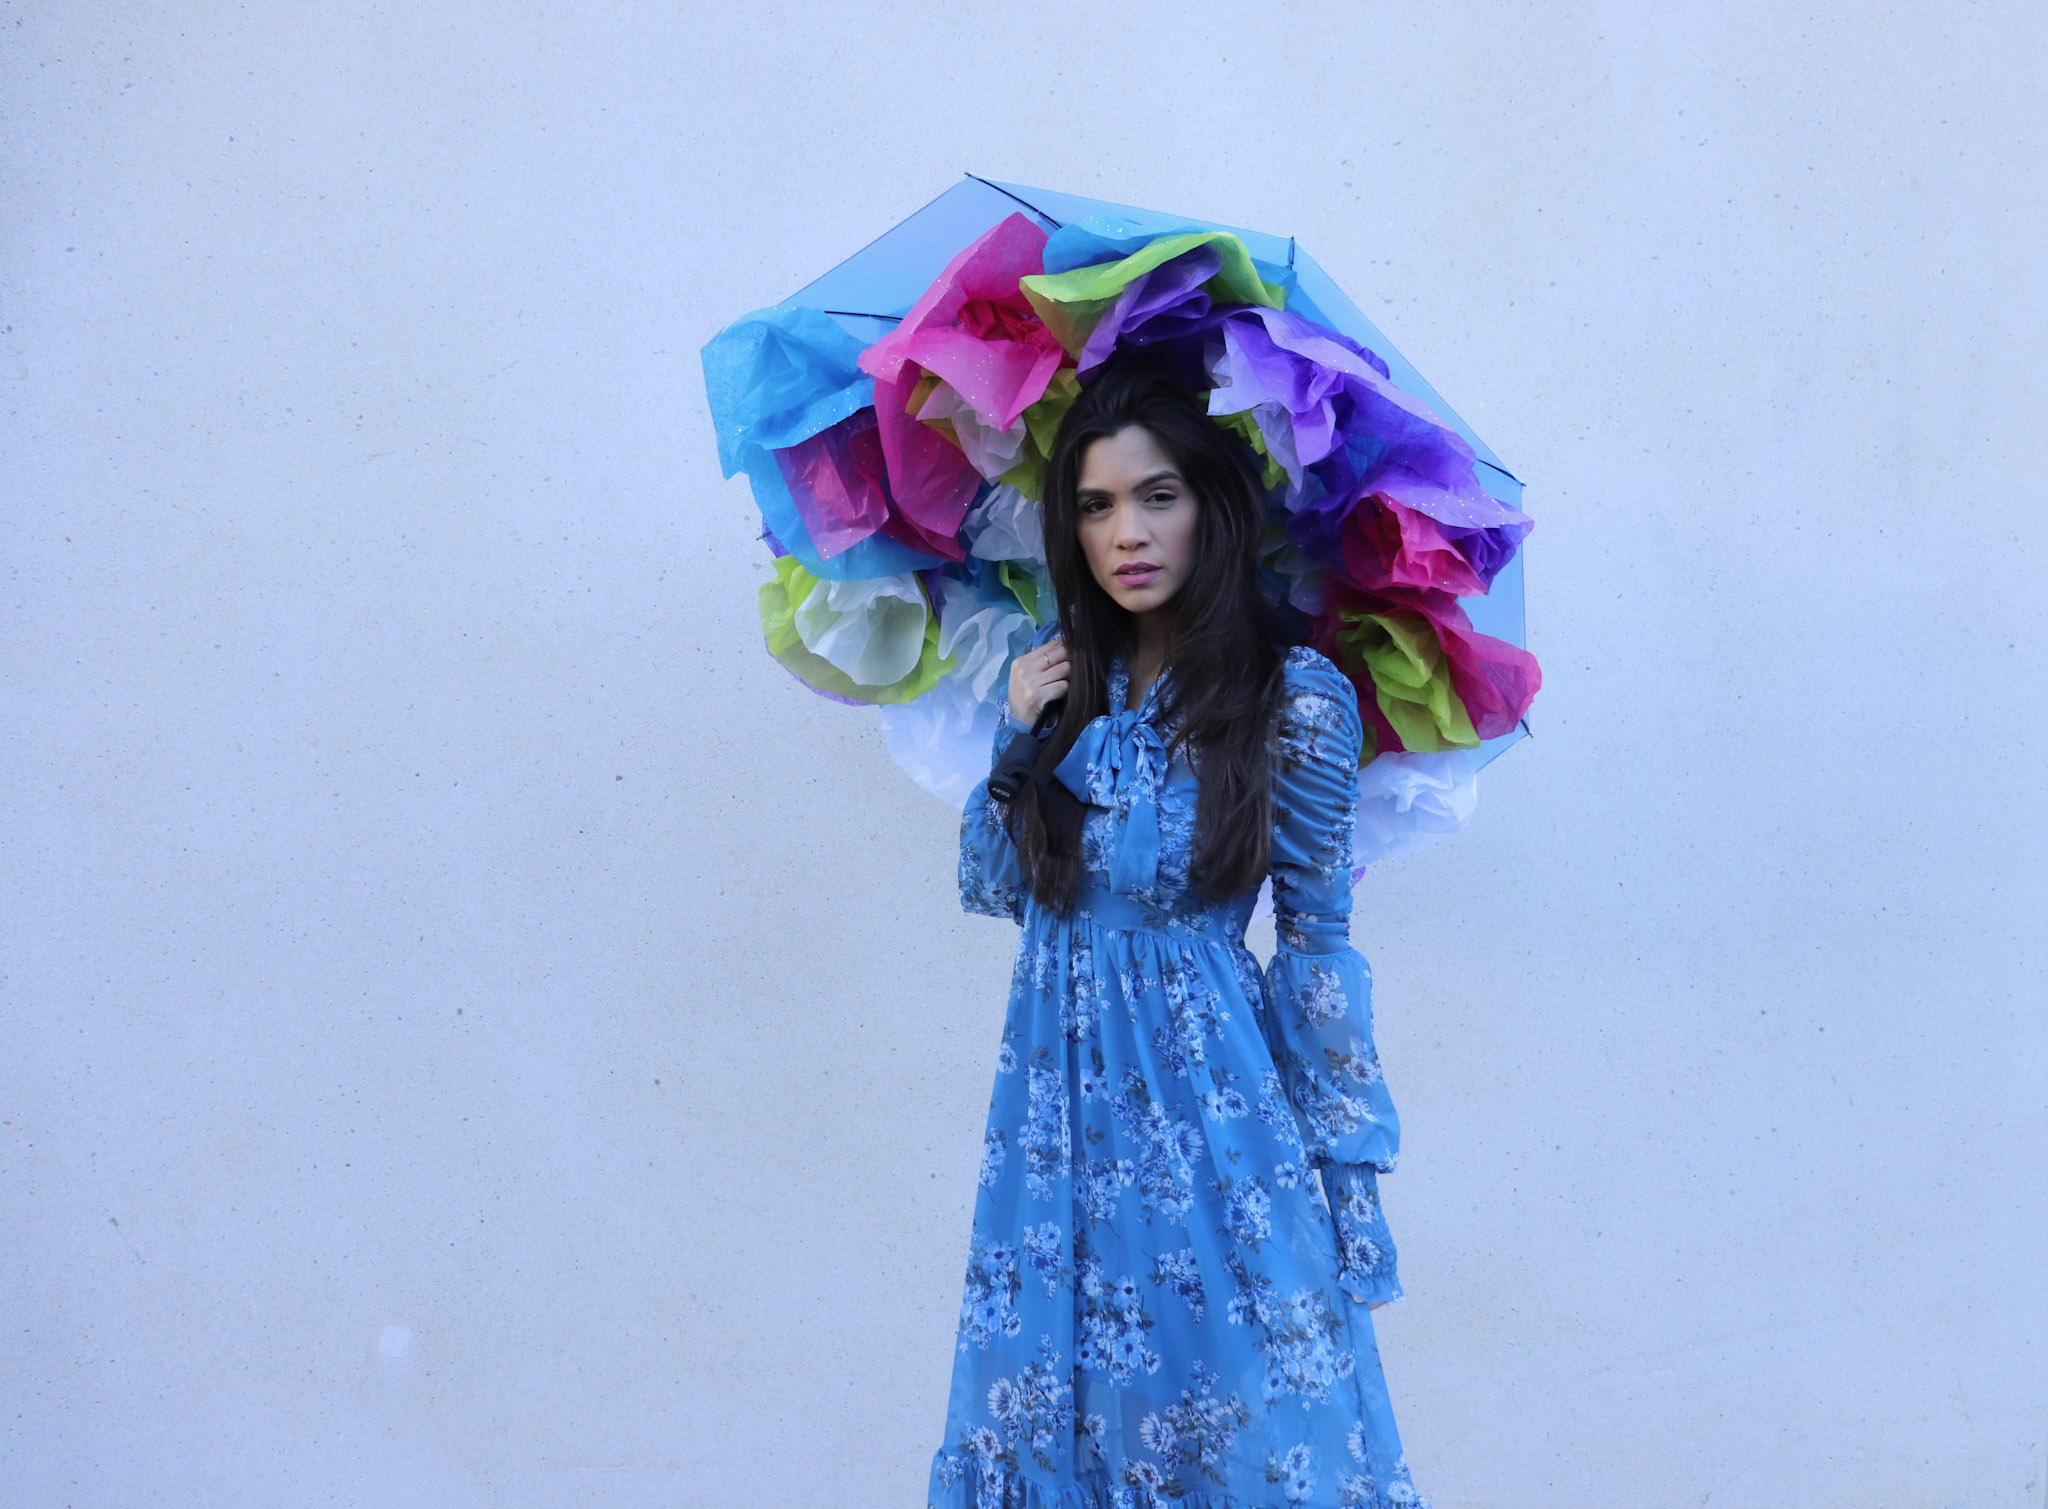 How to Make Flowers Out of Tissue Paper, Tissue Paper Craft, Tissue Paper Crafts, Giant Flowers out of Tissue Paper, Charlotte Artist, River Island Blue Floral Tie Neck Midi Dress